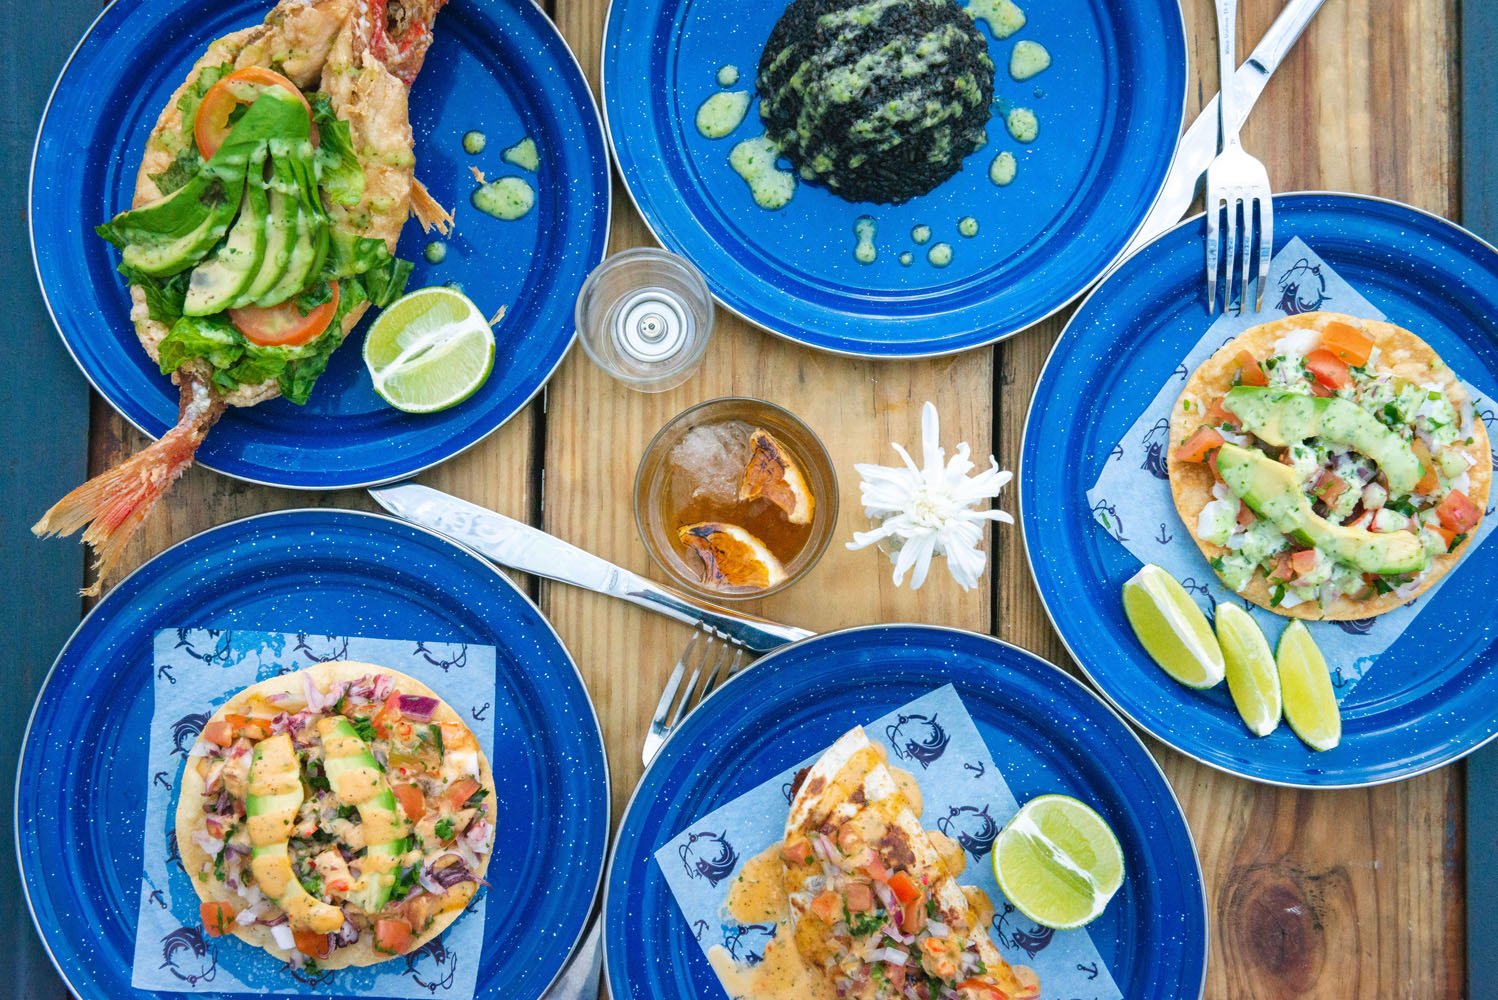 A variety of mexican dishes on blue plates, including shrimp tacos and enchiladas, spread on a wooden table, garnished with lime wedges.